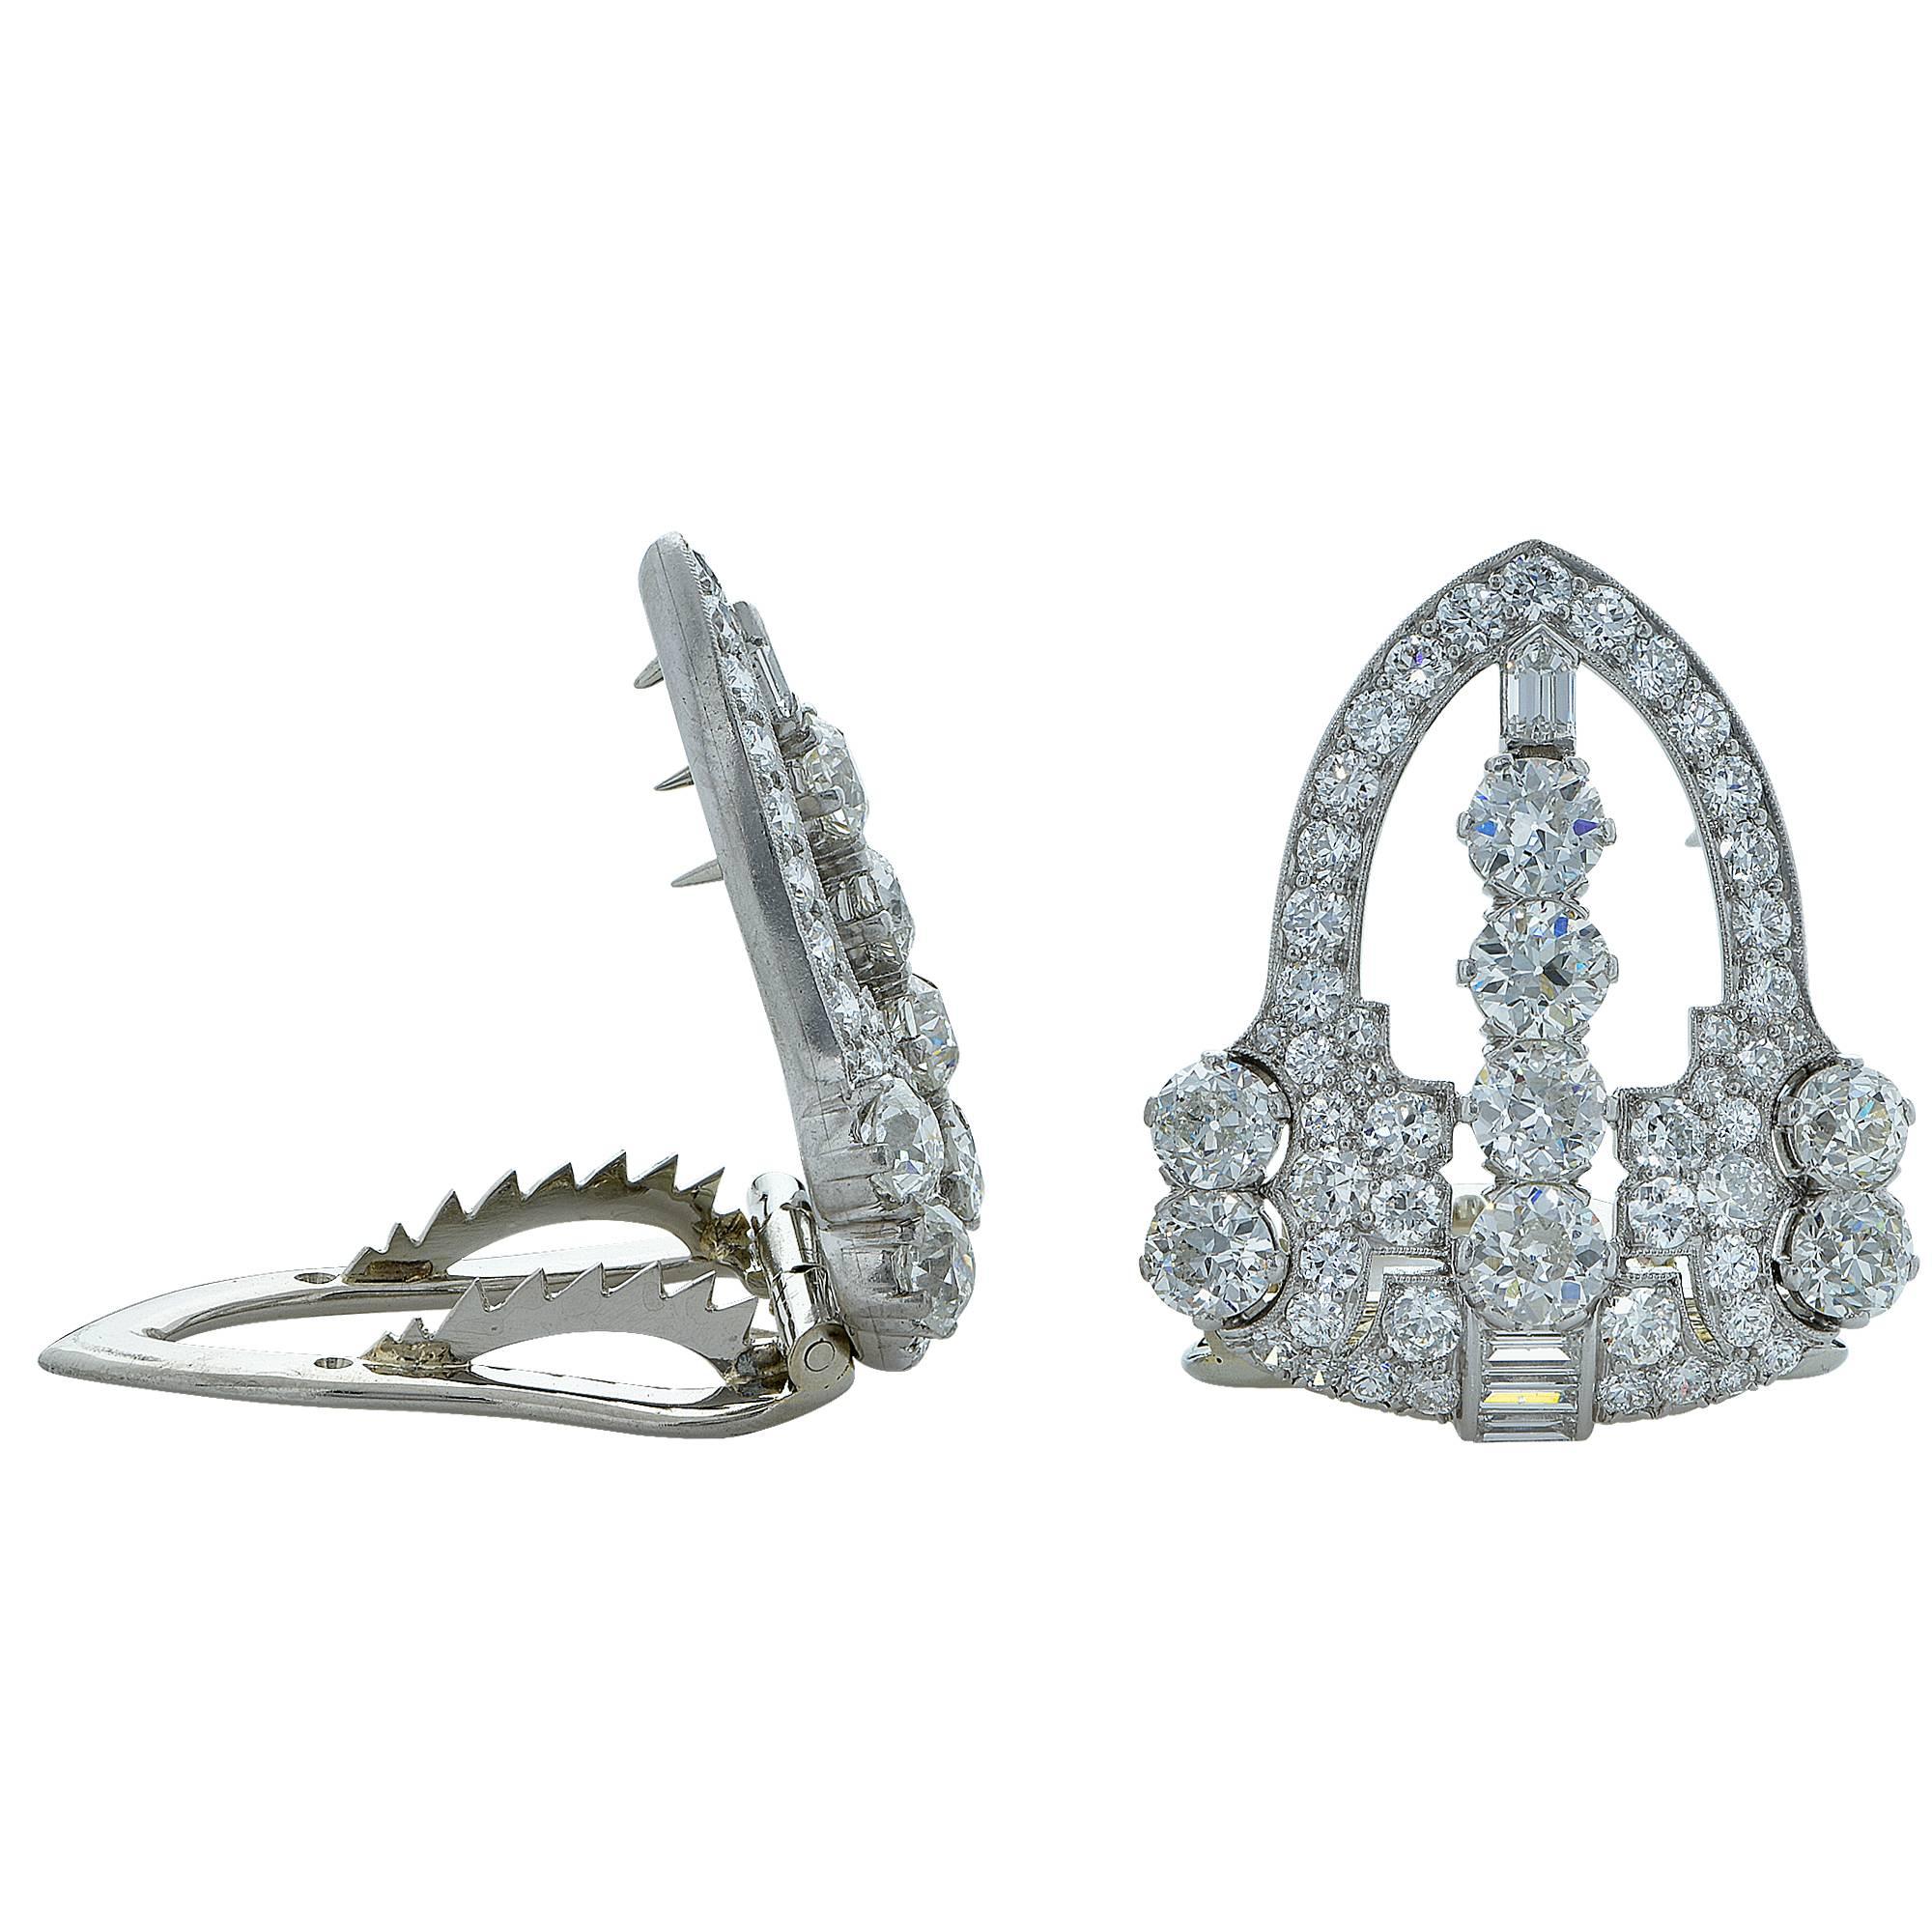 Platinum Art Deco Raymond Yard dress clips featuring approximately 8cts of European, baguette and shield cut diamonds. These gorgeous clips will compliment even the most discerning of jewelry aficionados.

These clips measure 1.09 inches in height